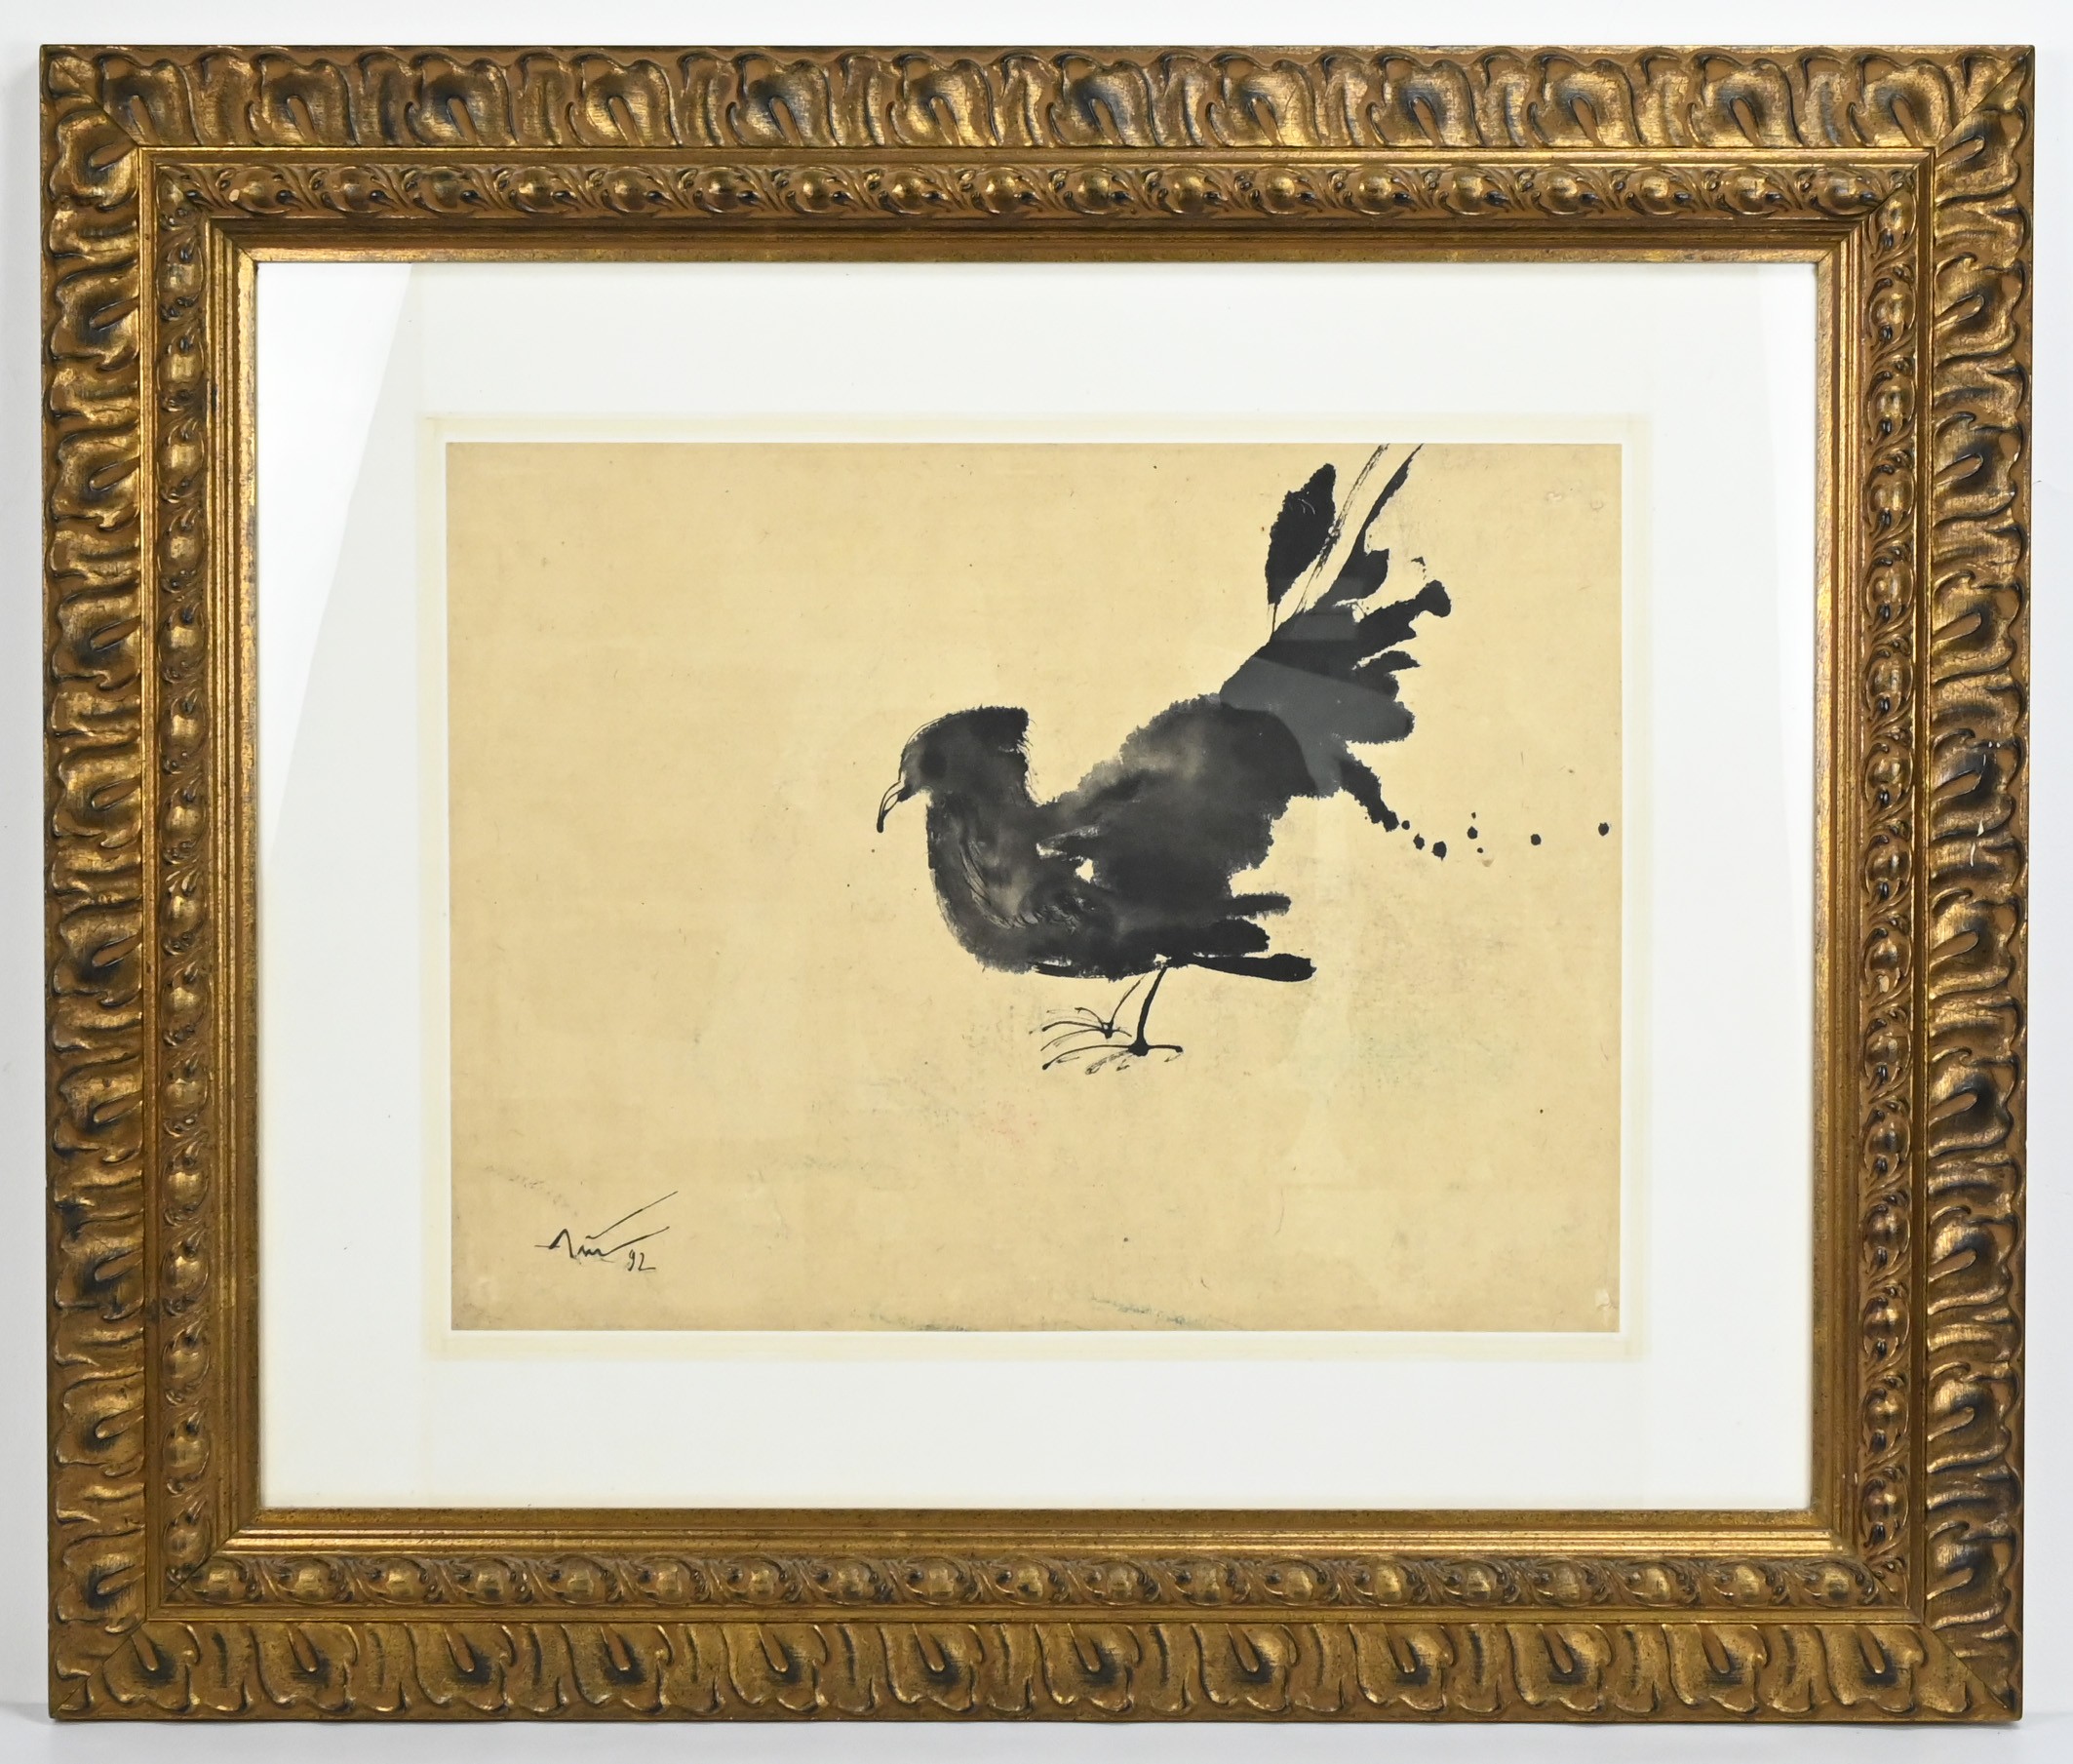 20TH CENTURY SINGAPOREAN SCHOOL - Ink study of a bird (1992), indistinctly signed and dated lower